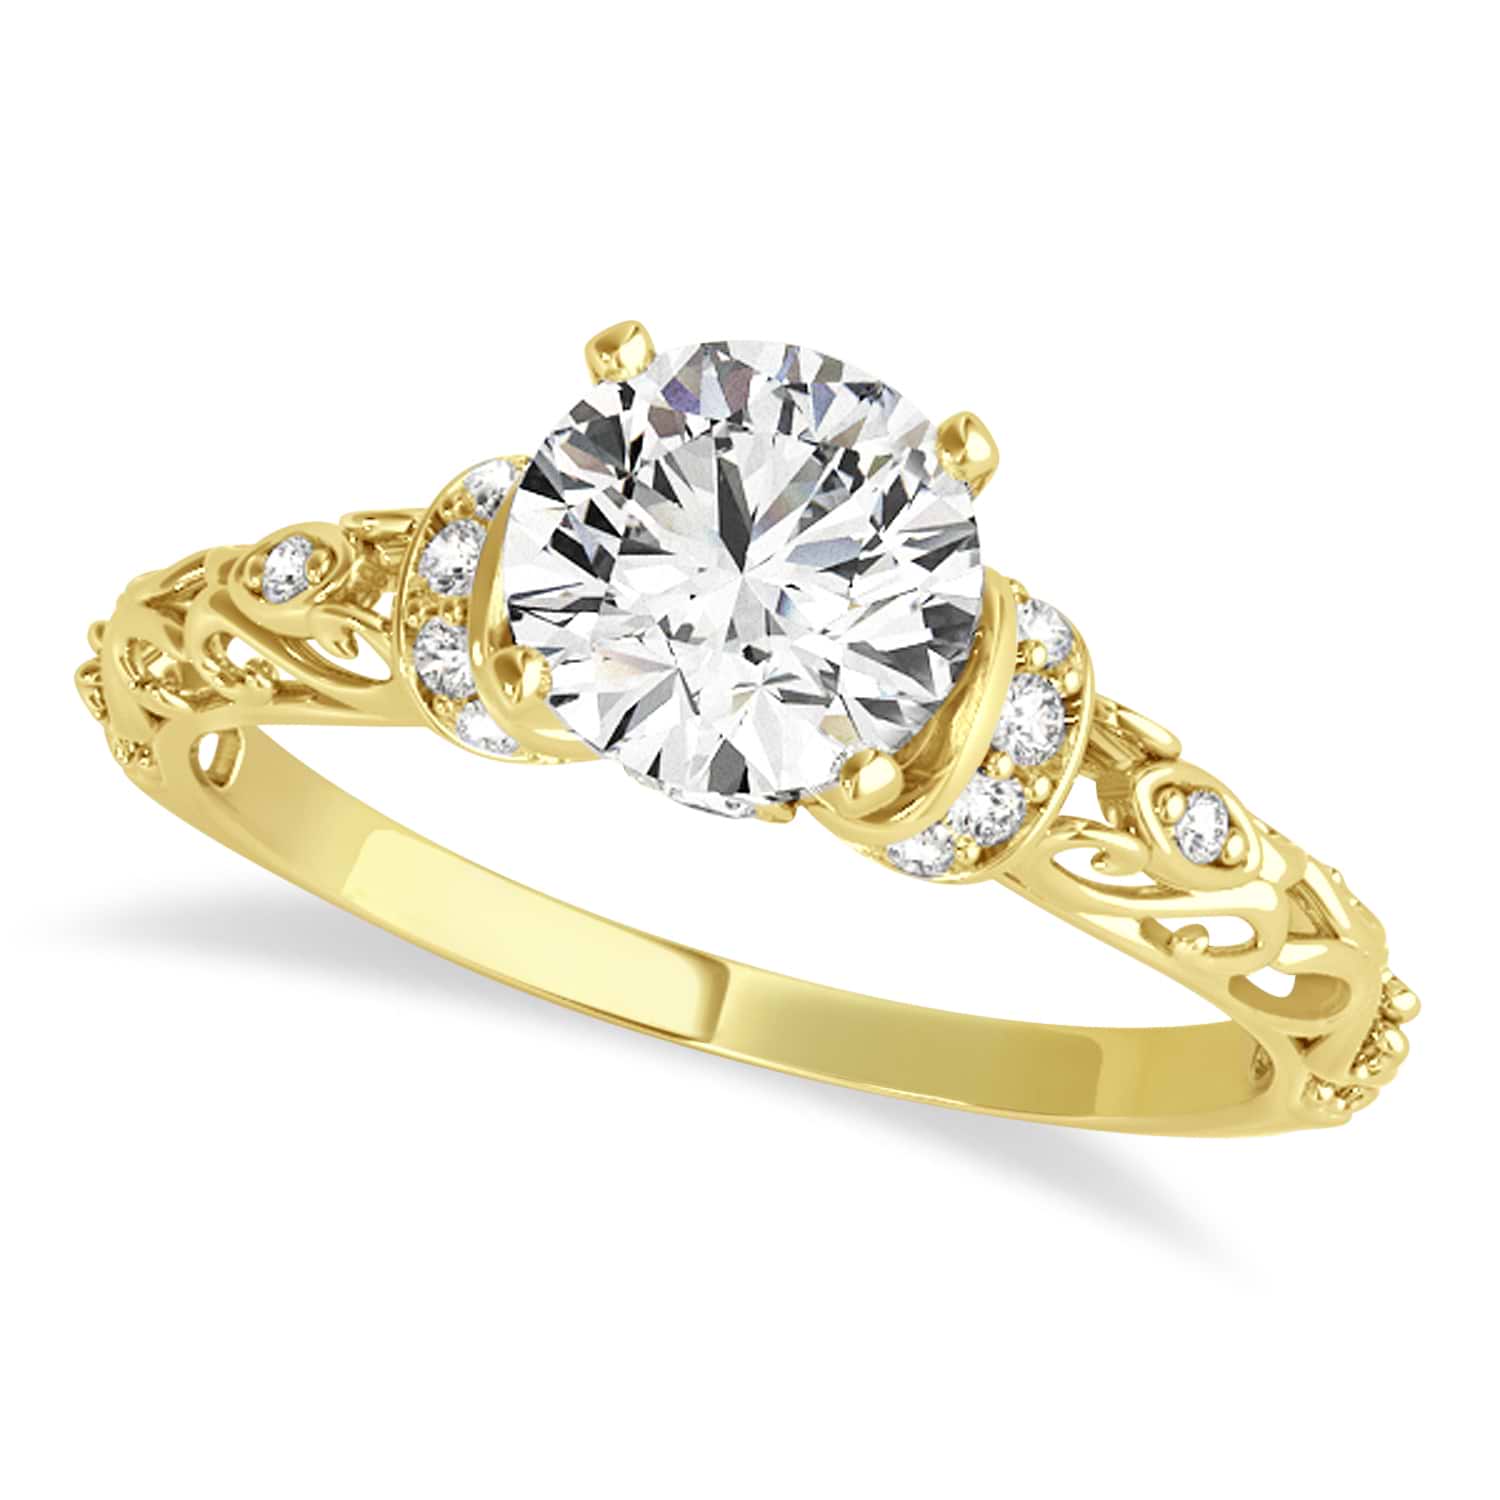 Diamond Antique Style Engagement Ring 18k Yellow Gold (1.12ct)